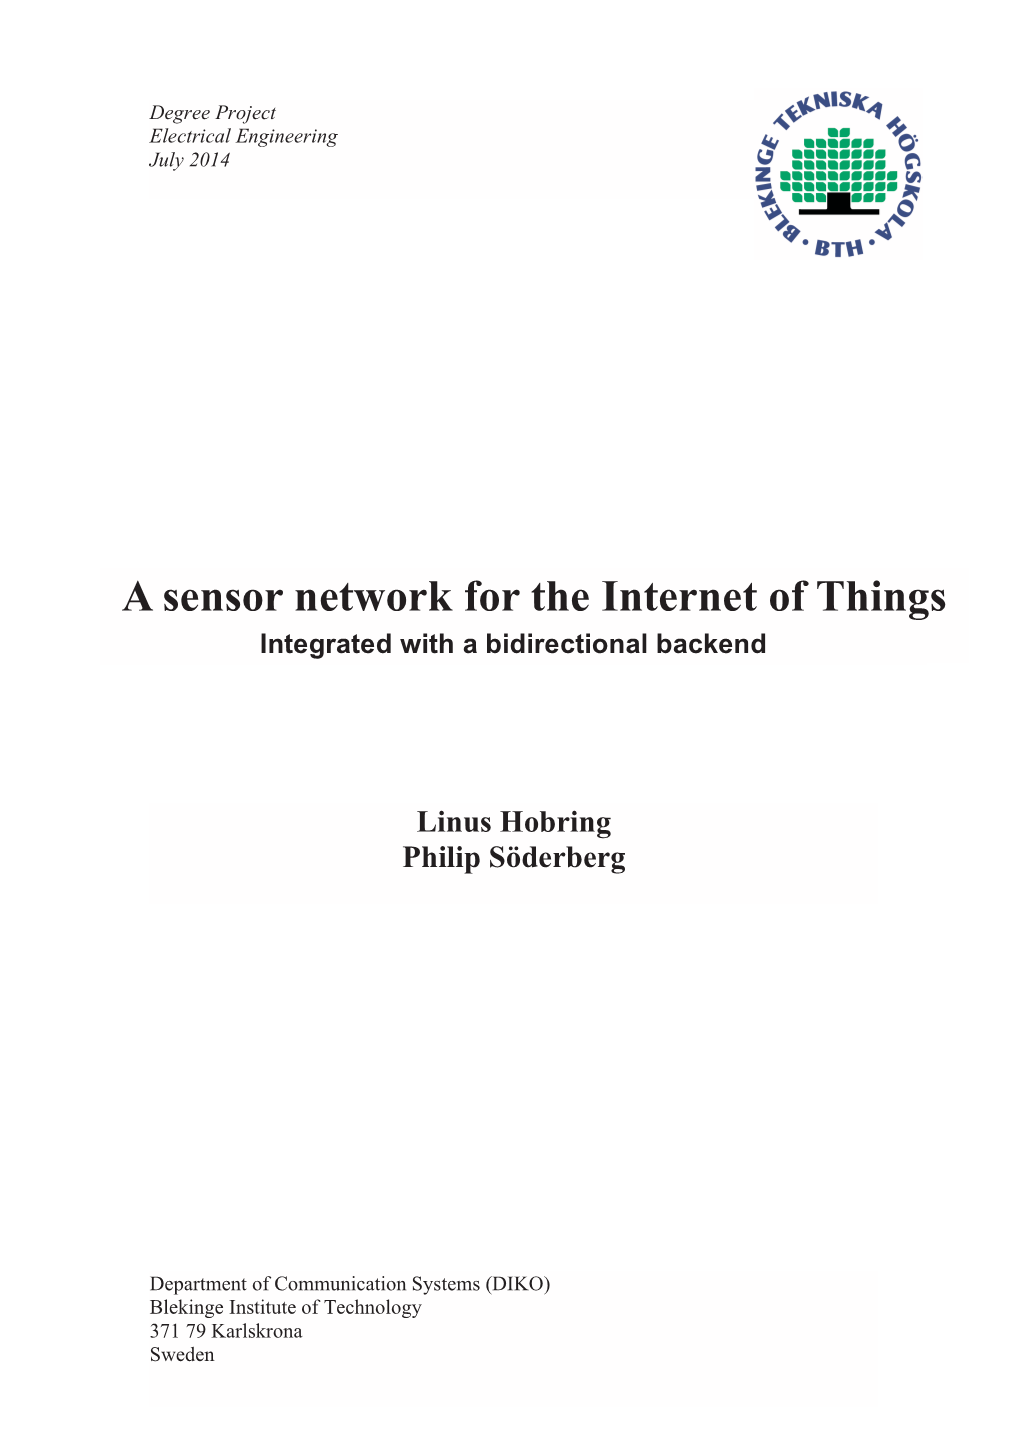 A Sensor Network for the Internet of Things Integrated with a Bidirectional Backend